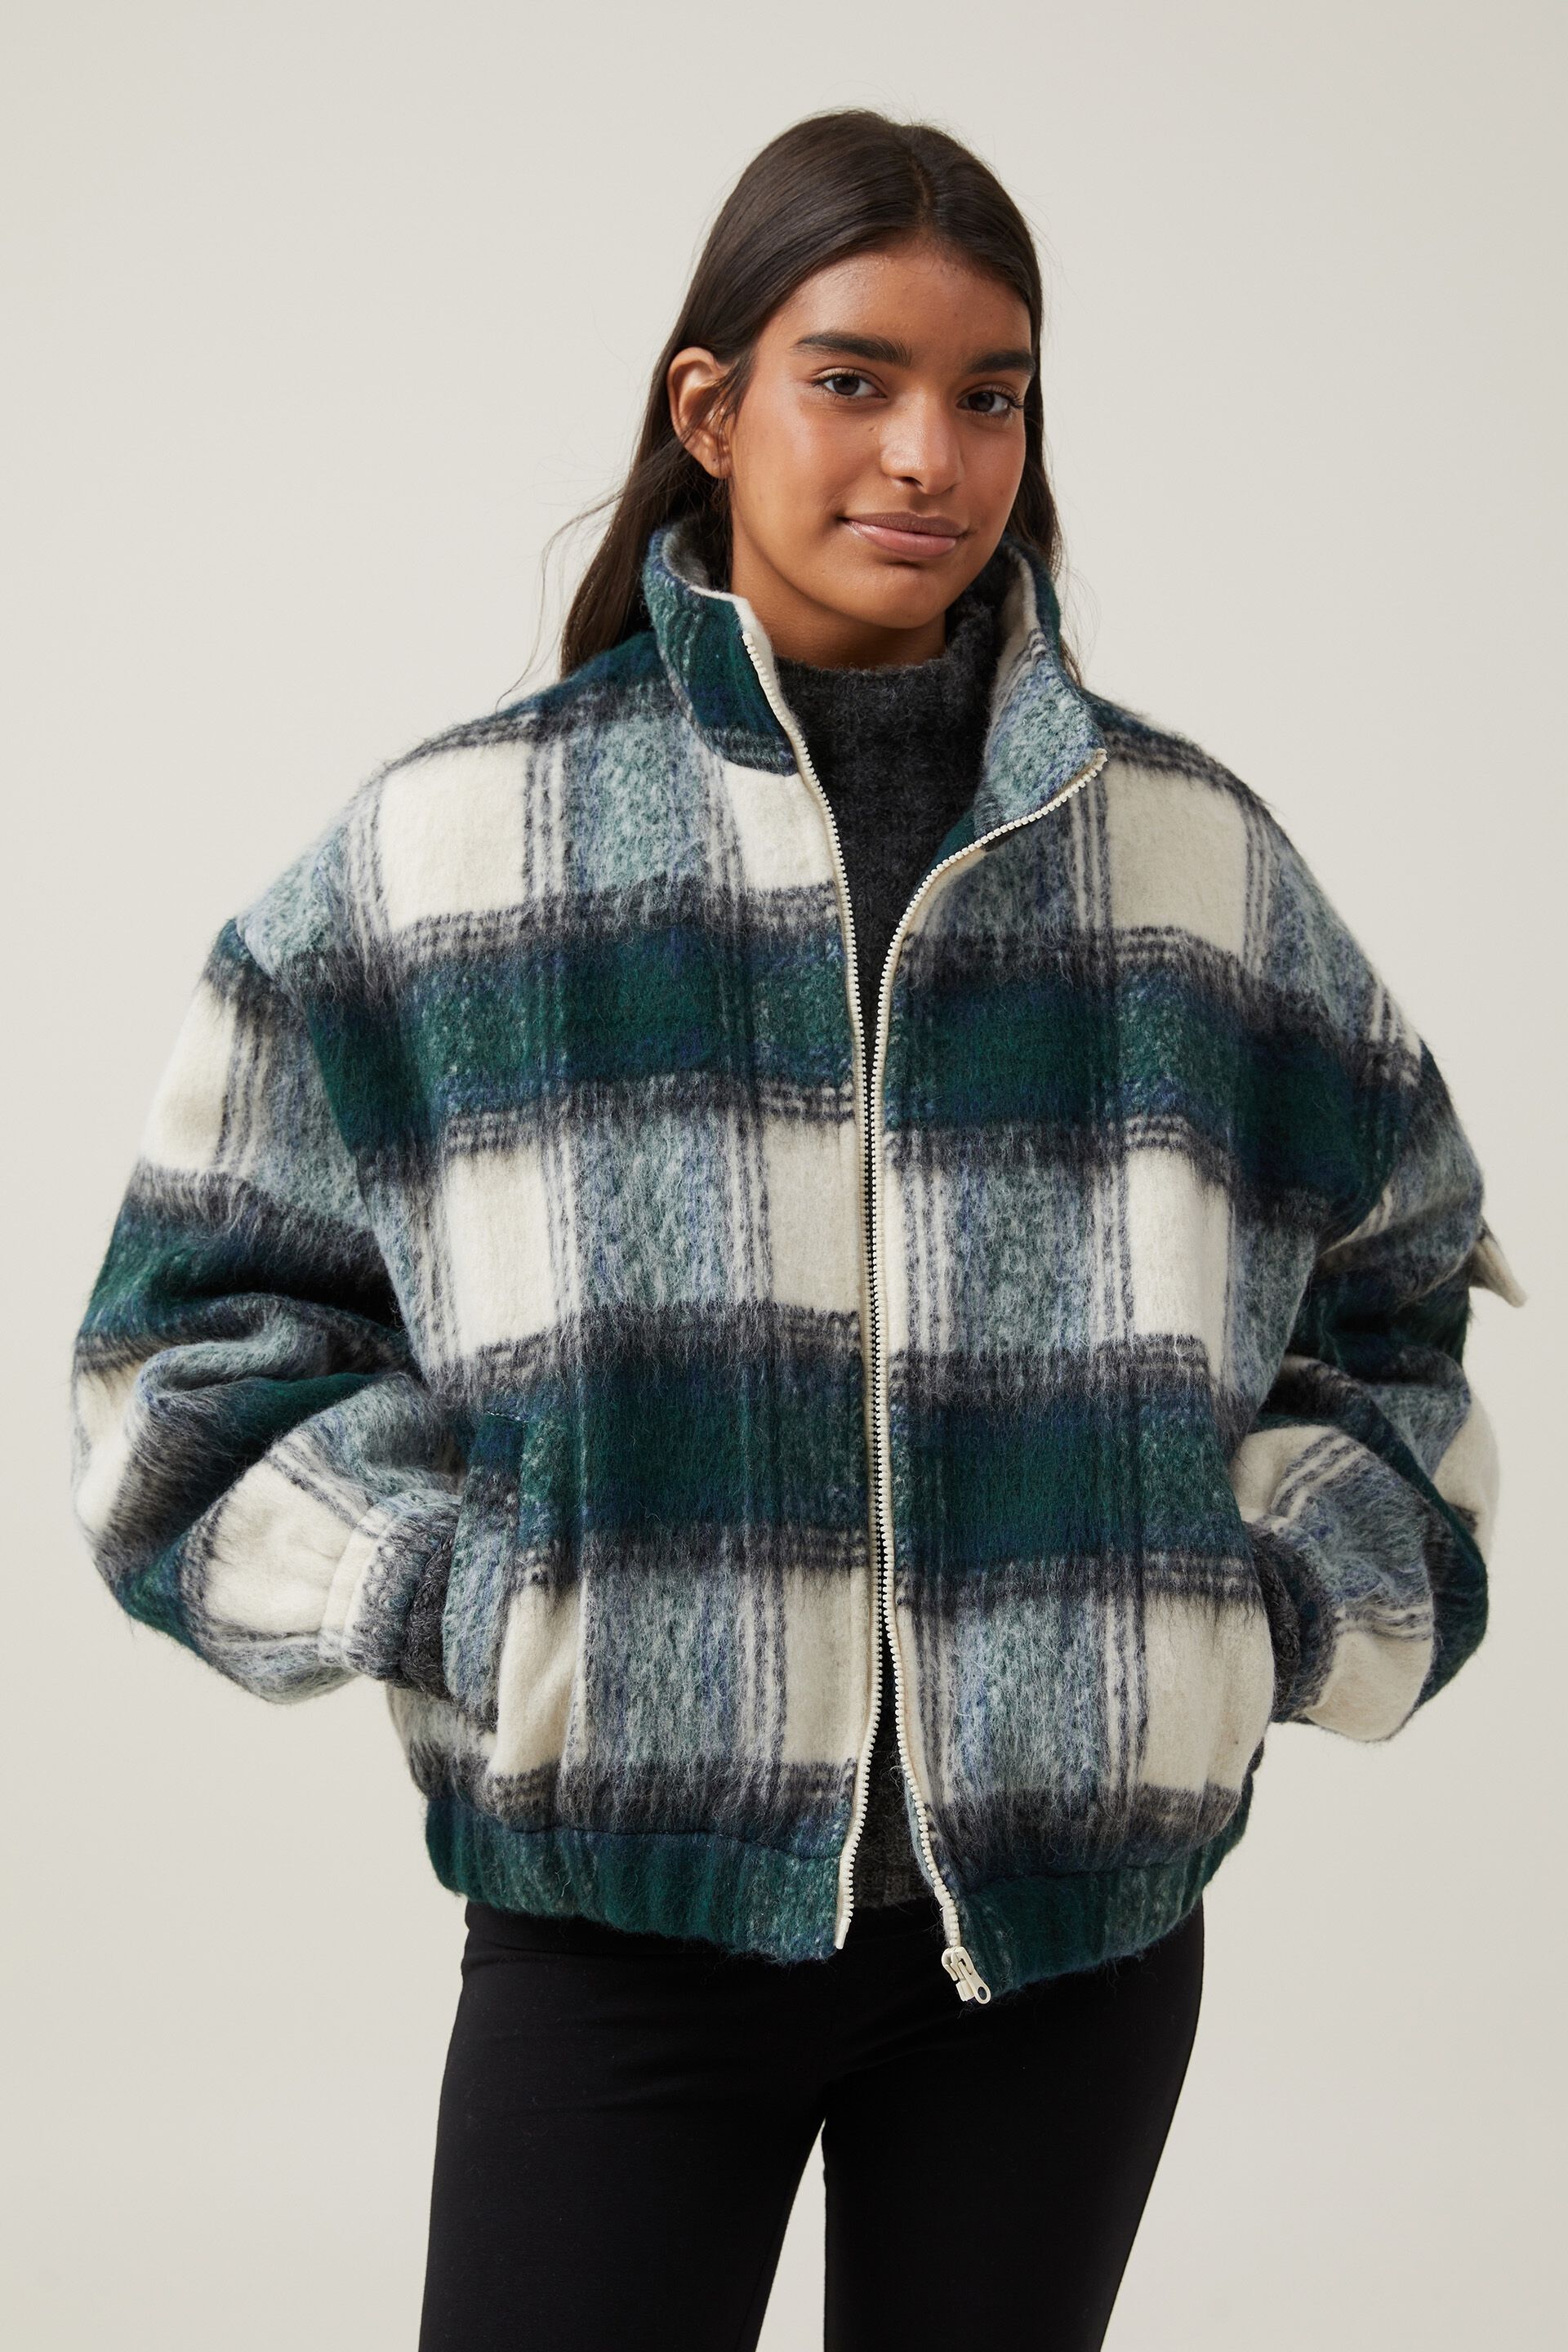 Cotton On Women's Plaid Jacket | CoolSprings Galleria